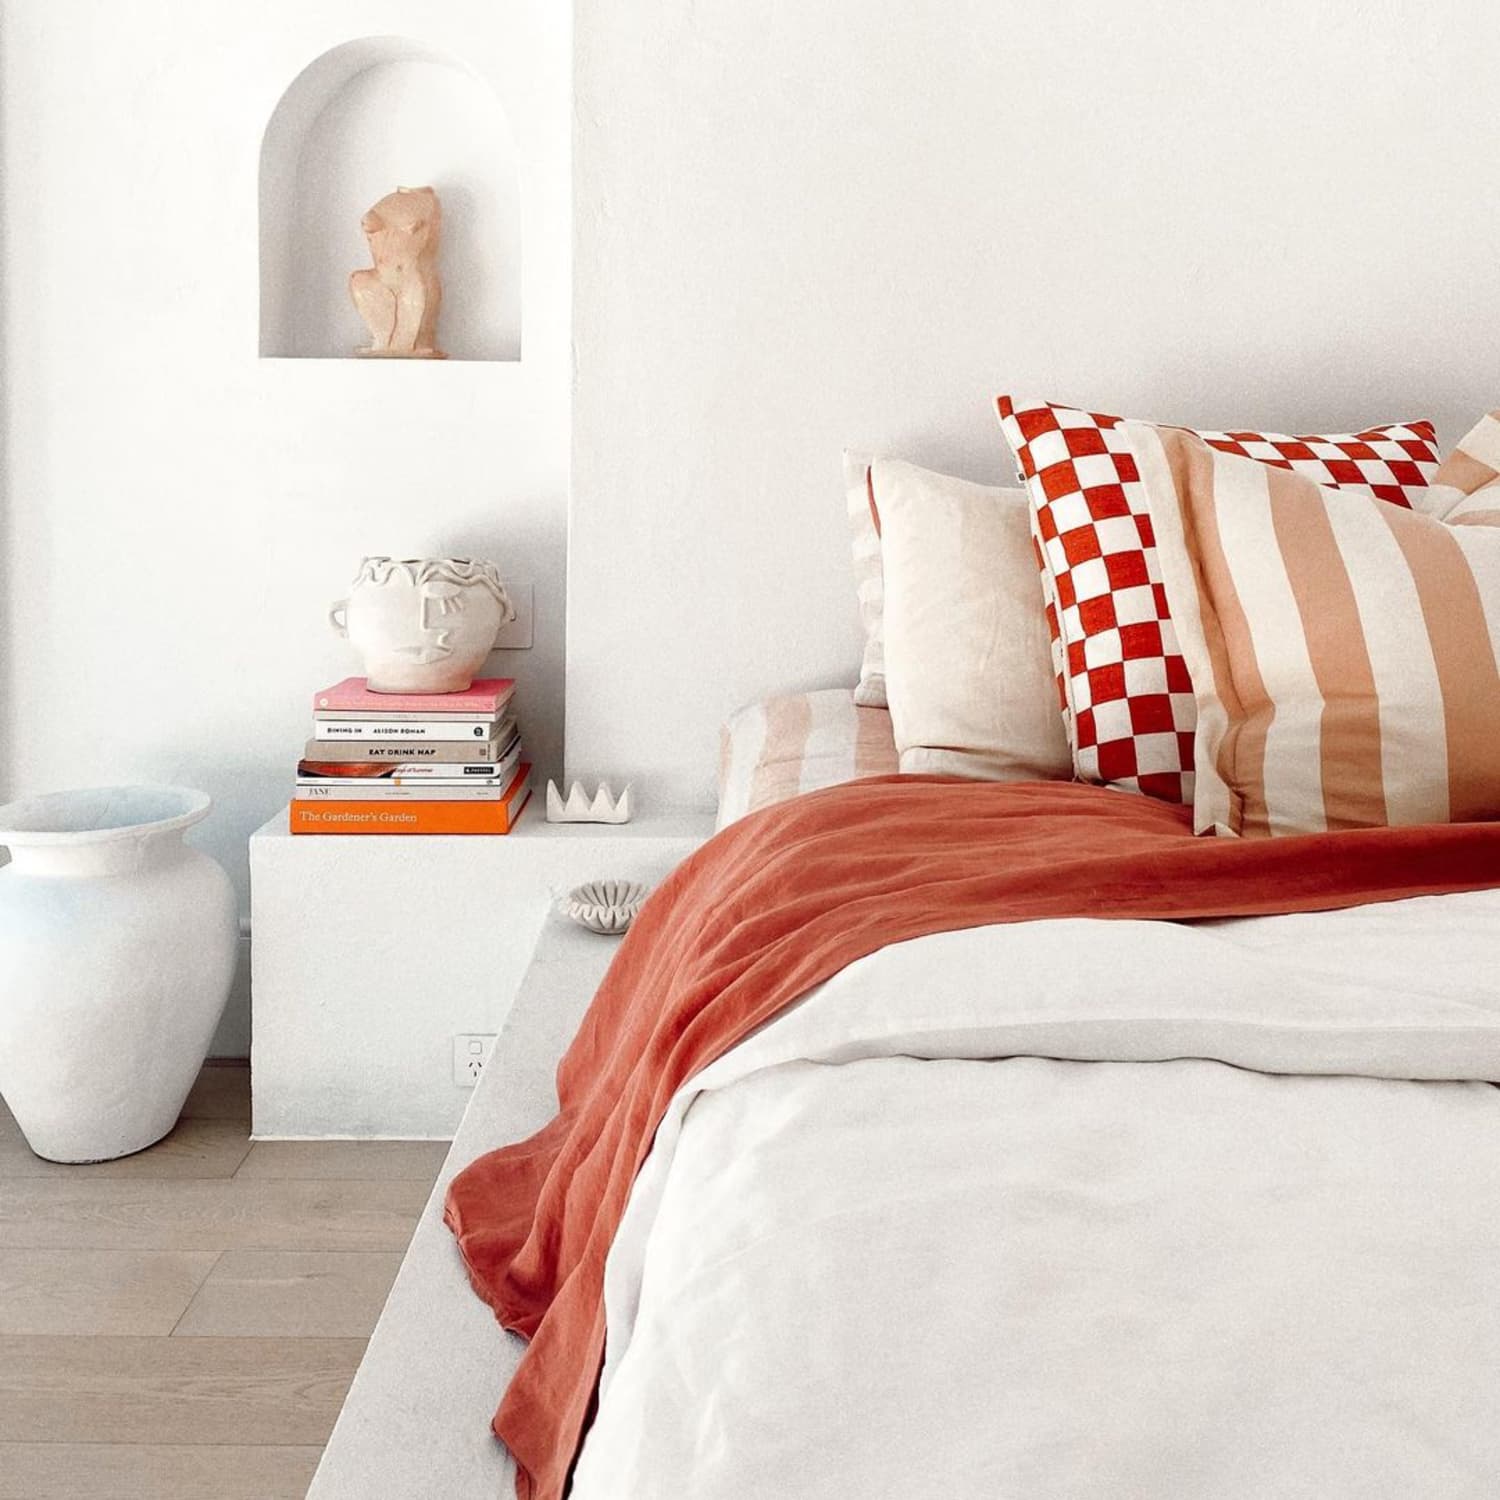 s Huge Sale on Nate Berkus Home Bedding, Blankets, and Pillows